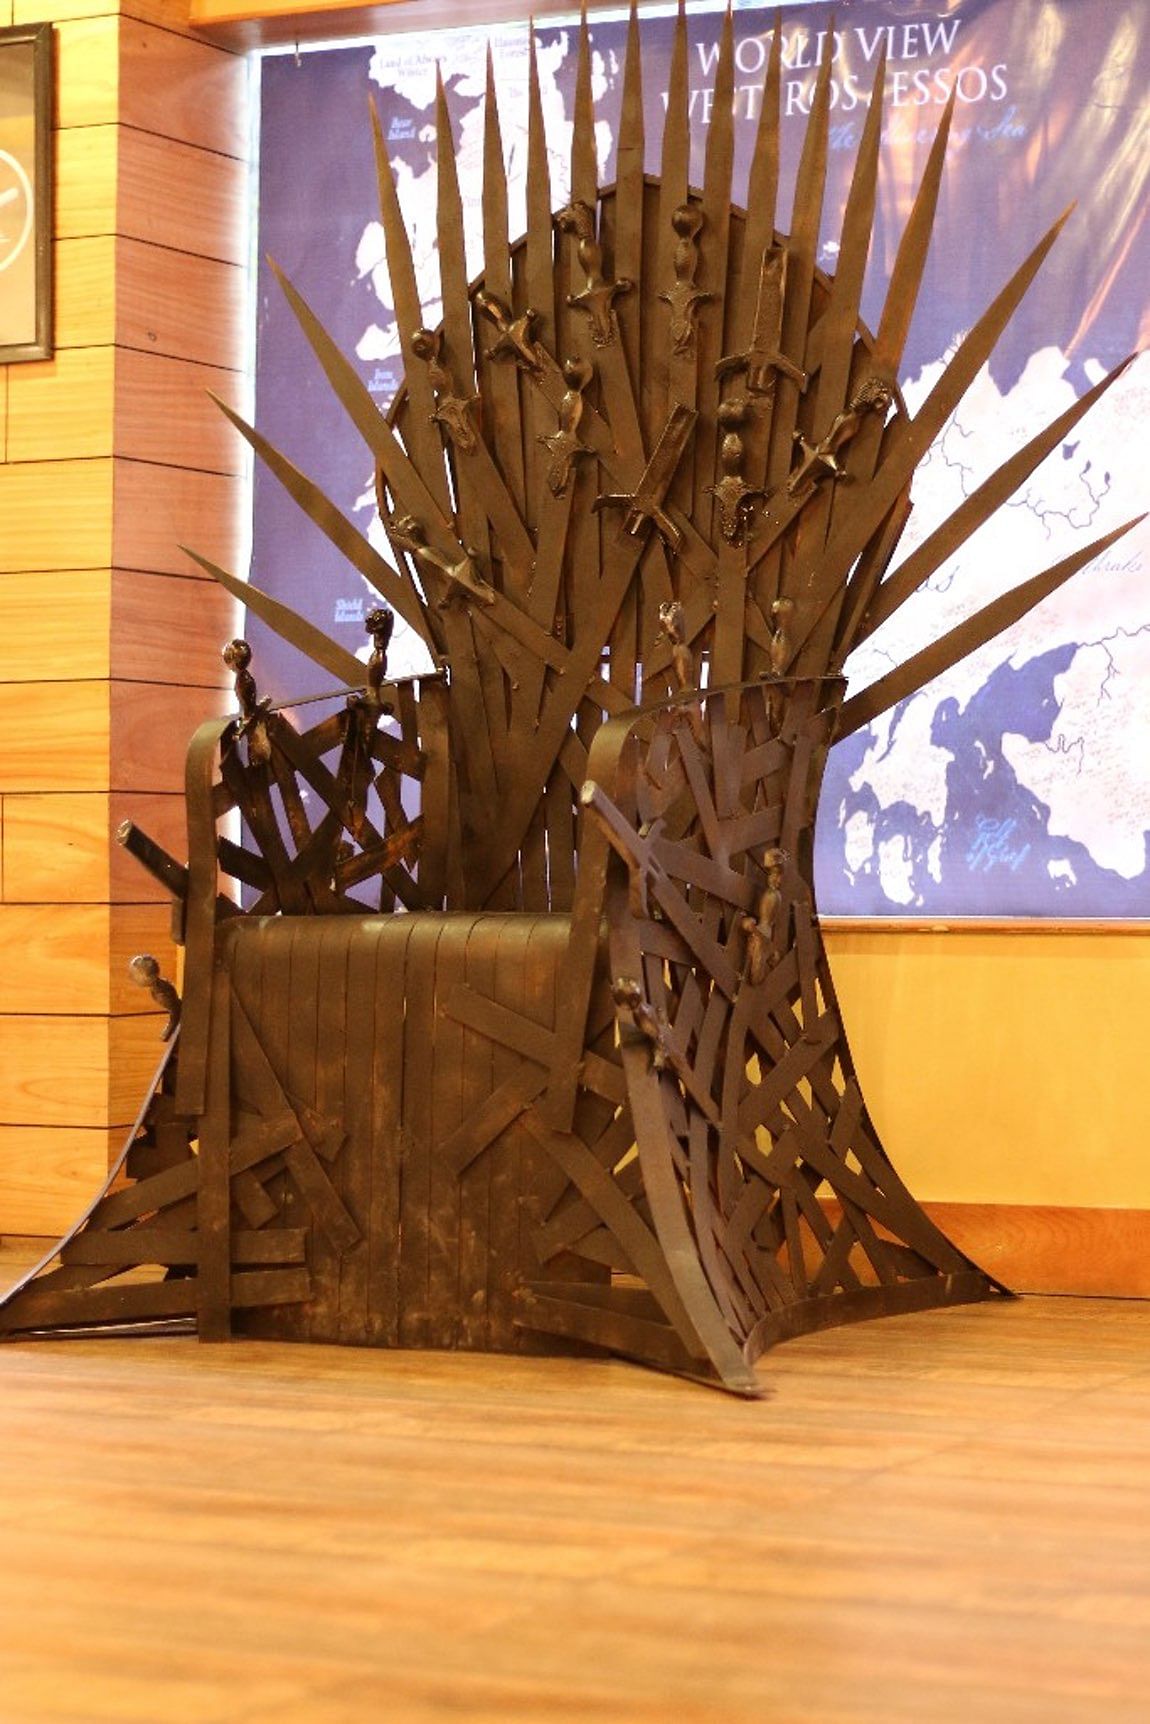 And it has the iron throne too!